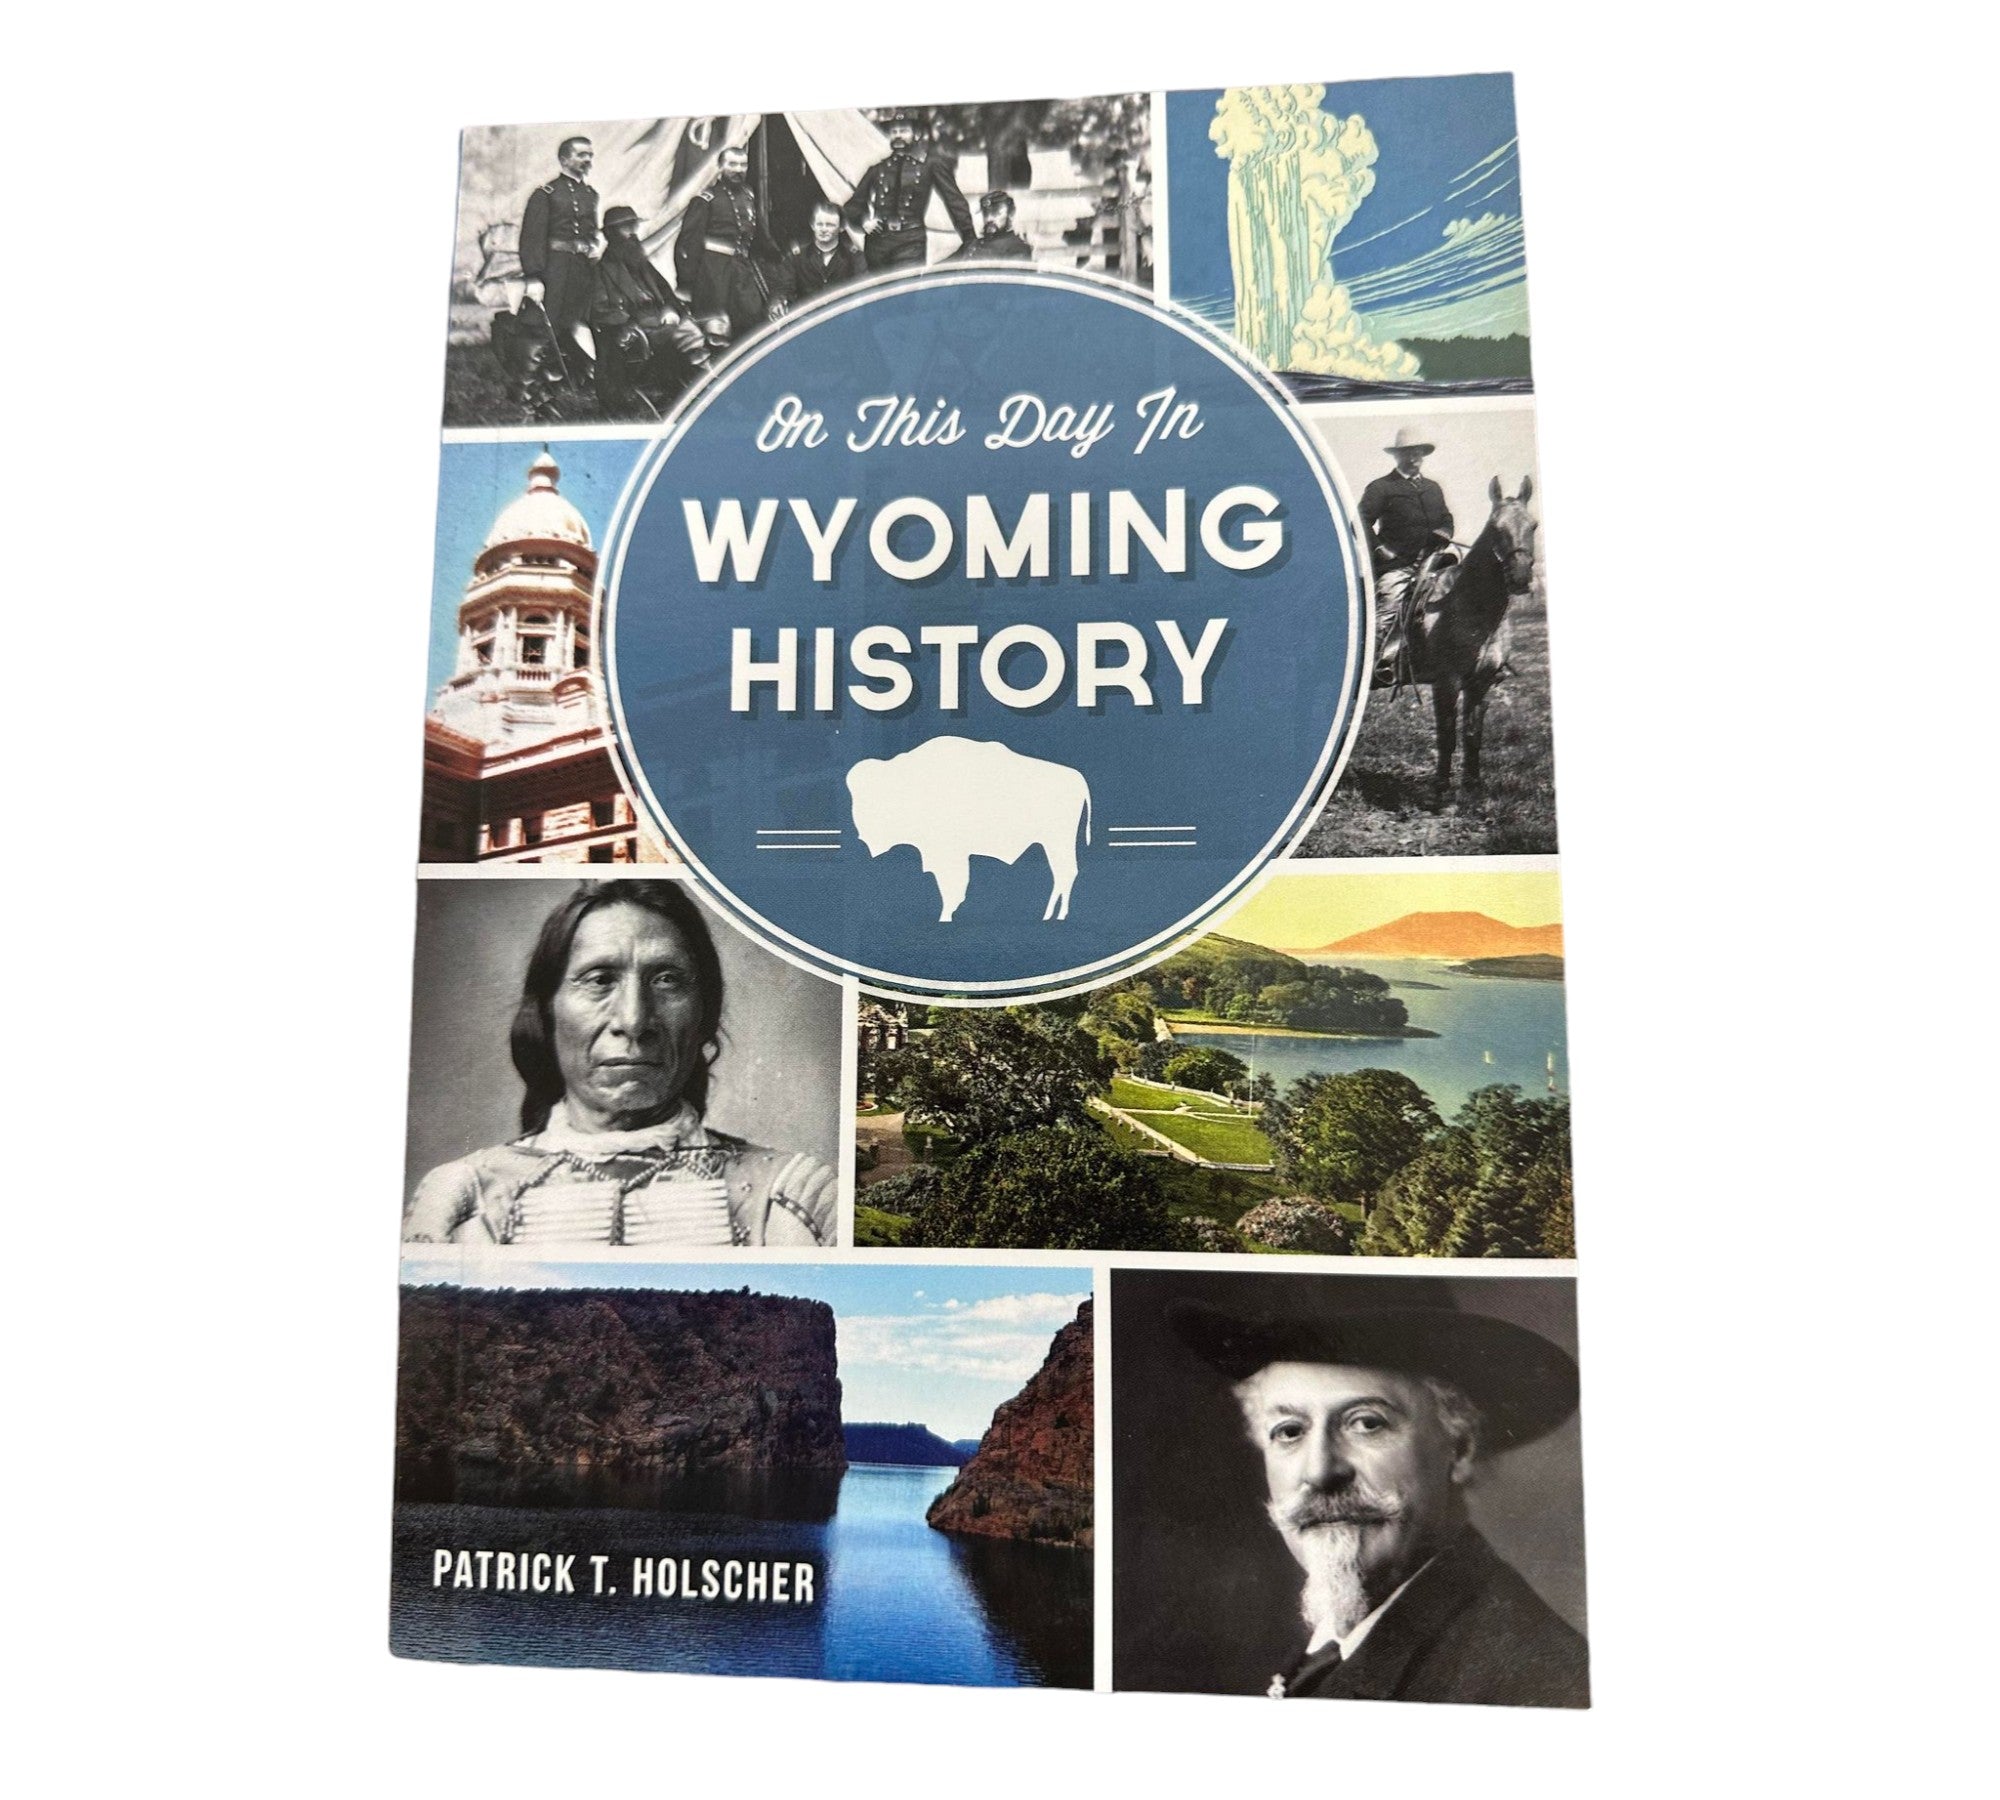 On this Day in Wyoming History